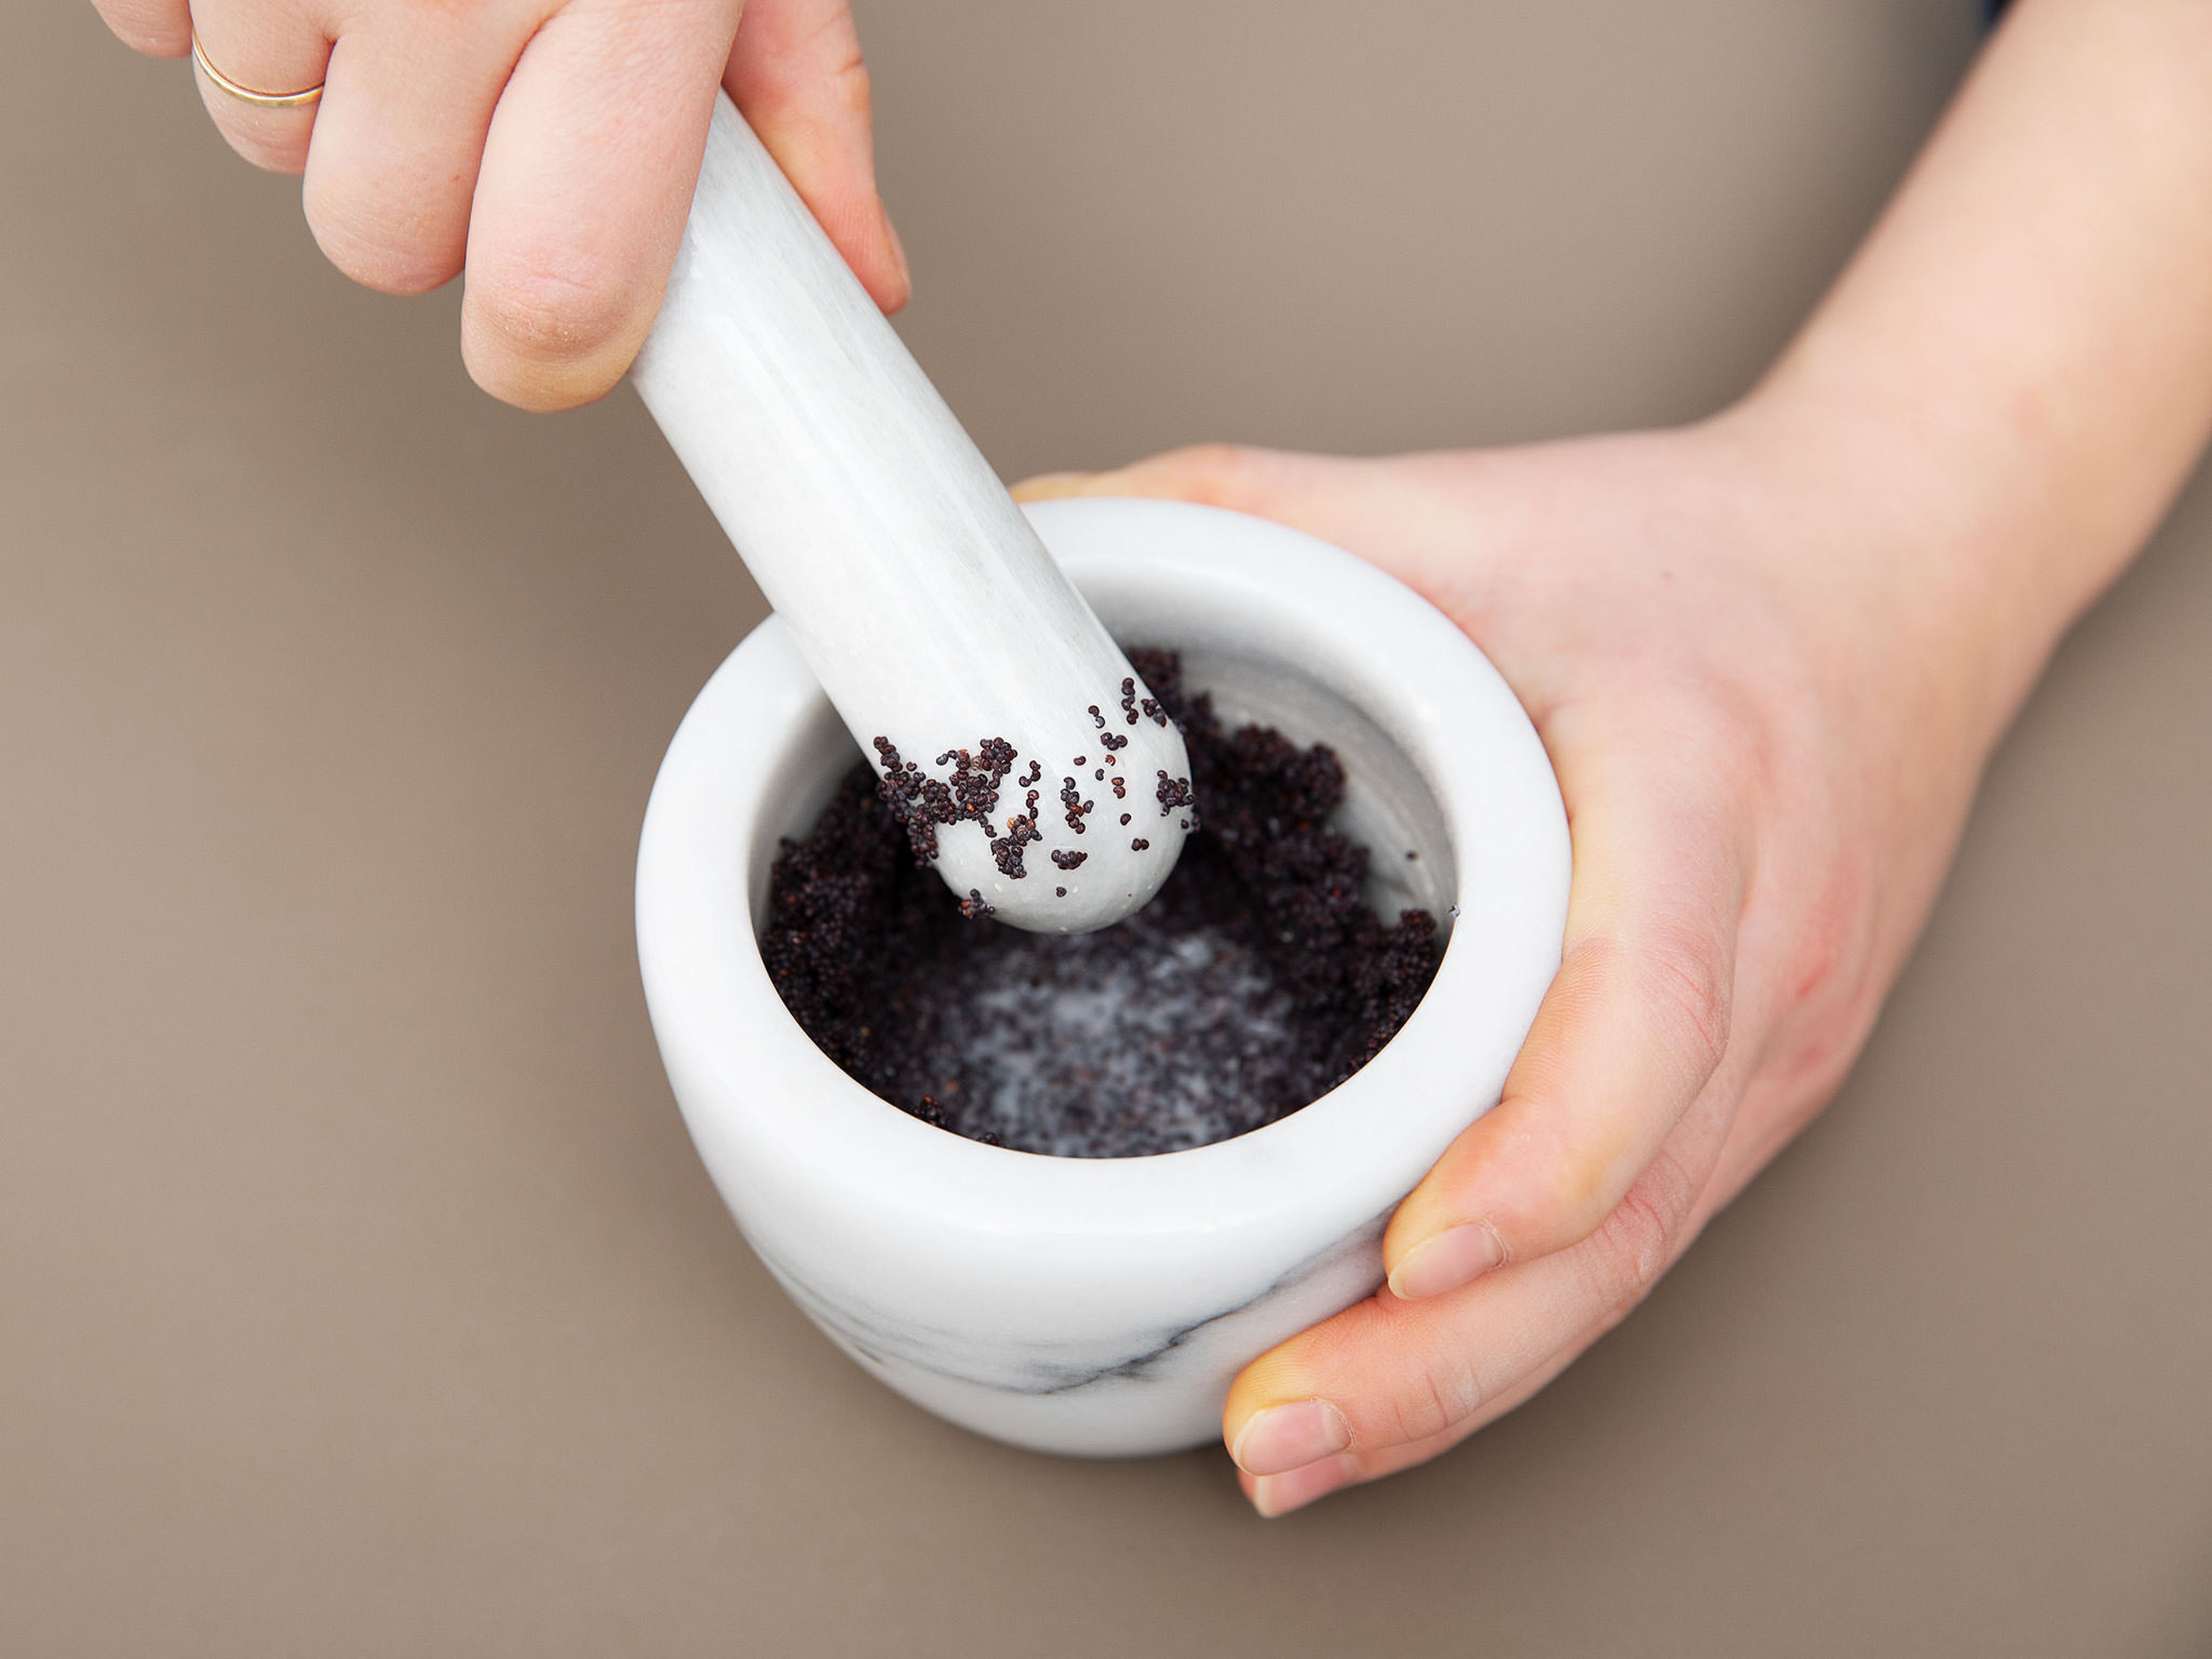 Soak the poppy seeds overnight. Make a smooth paste of the poppy seeds.